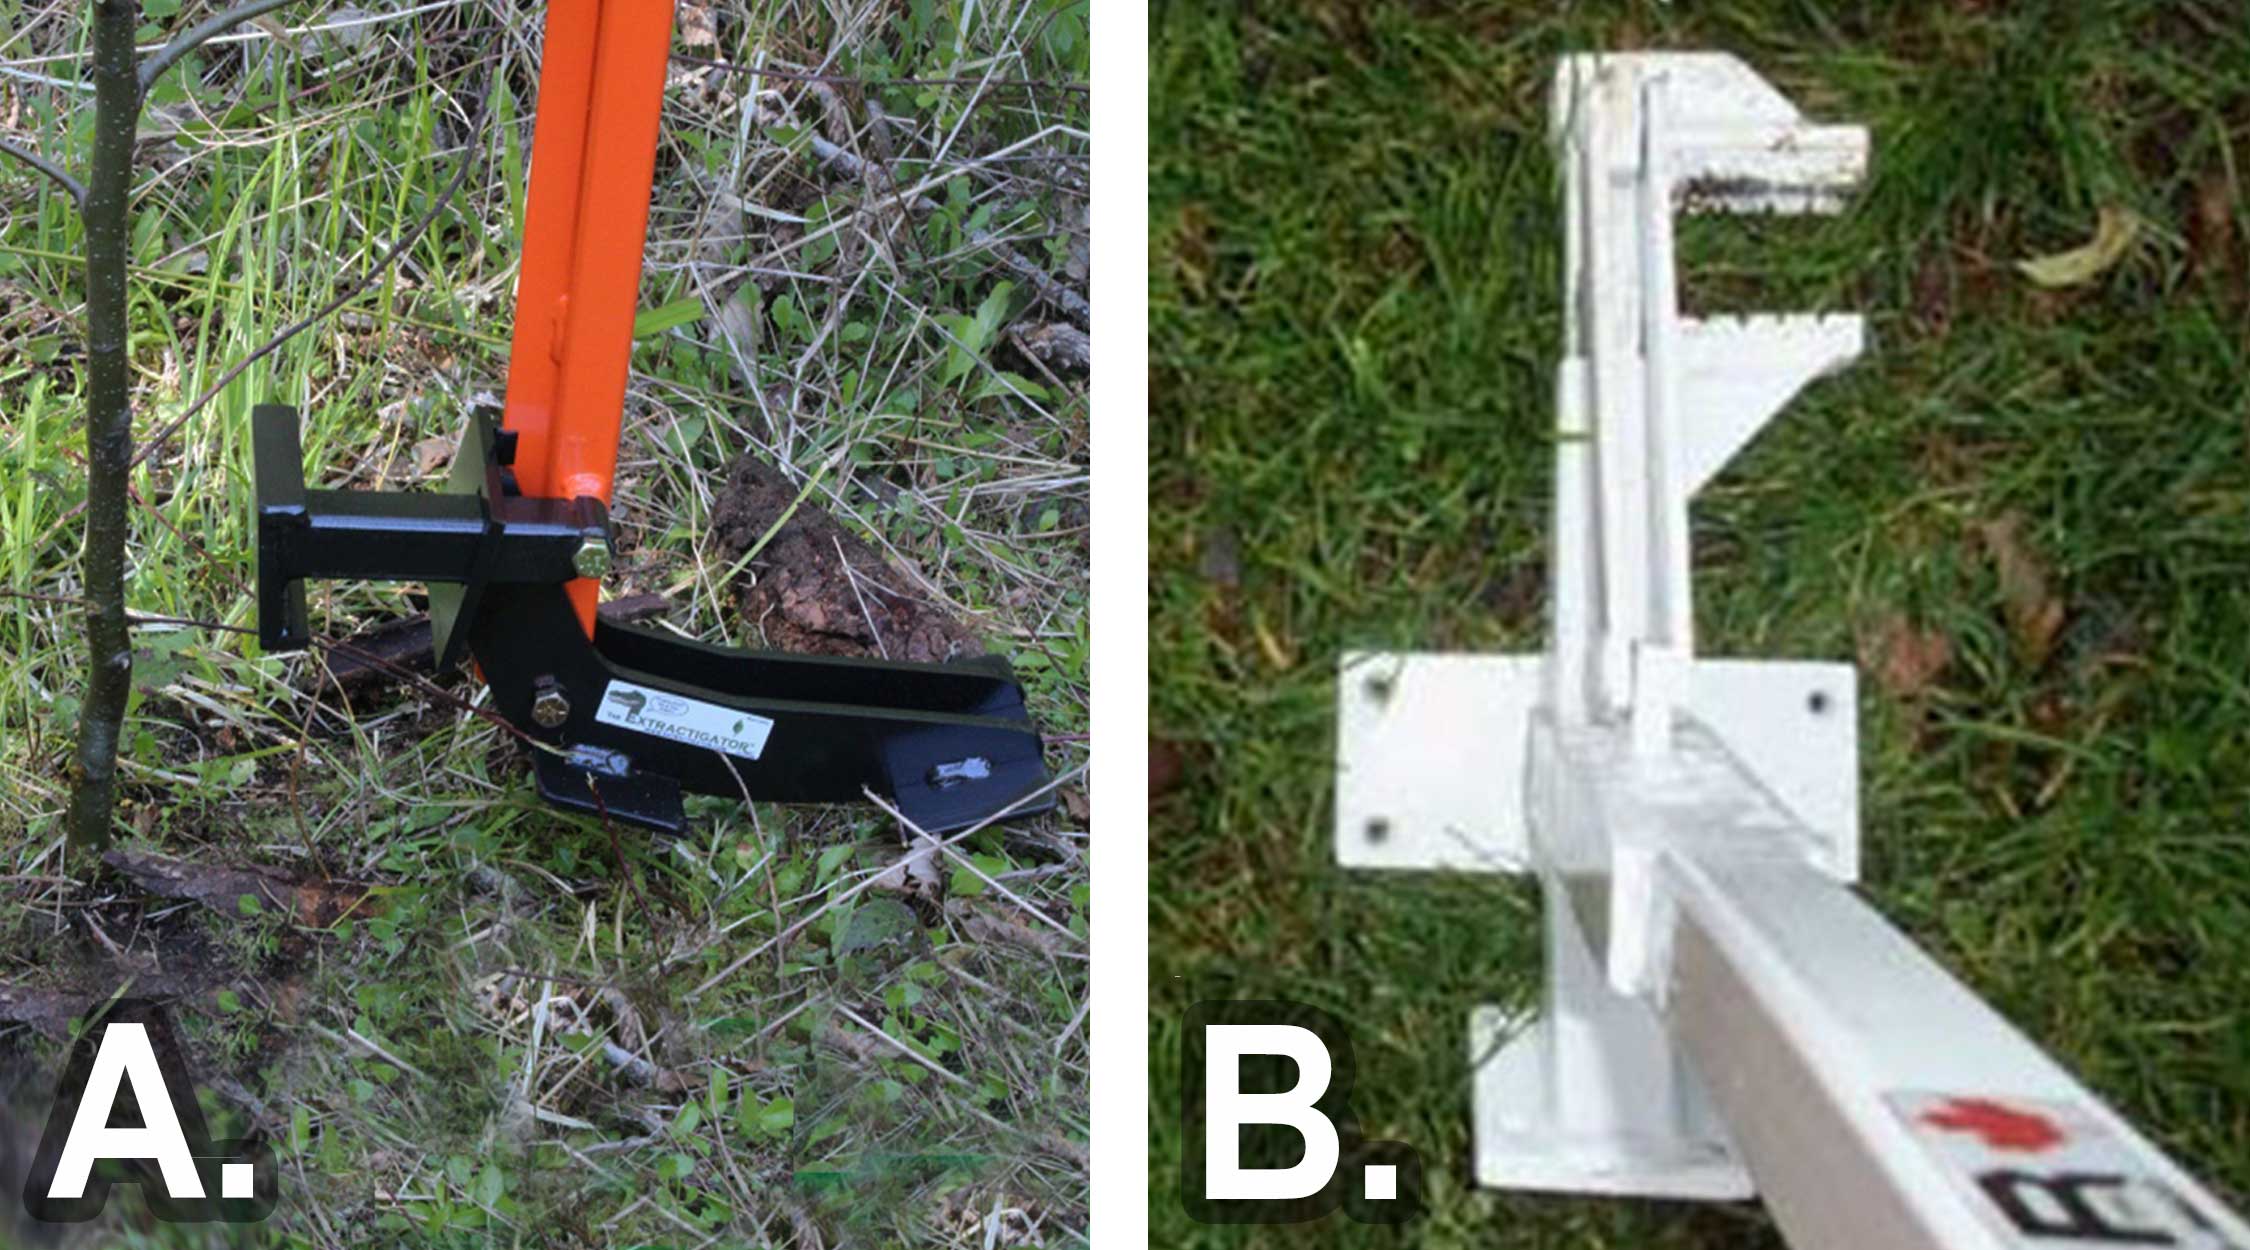 Left: Figure 5-A Exractigator® tree removal tool. Right: Figure 5-B Pullerbear® tree removal tool.